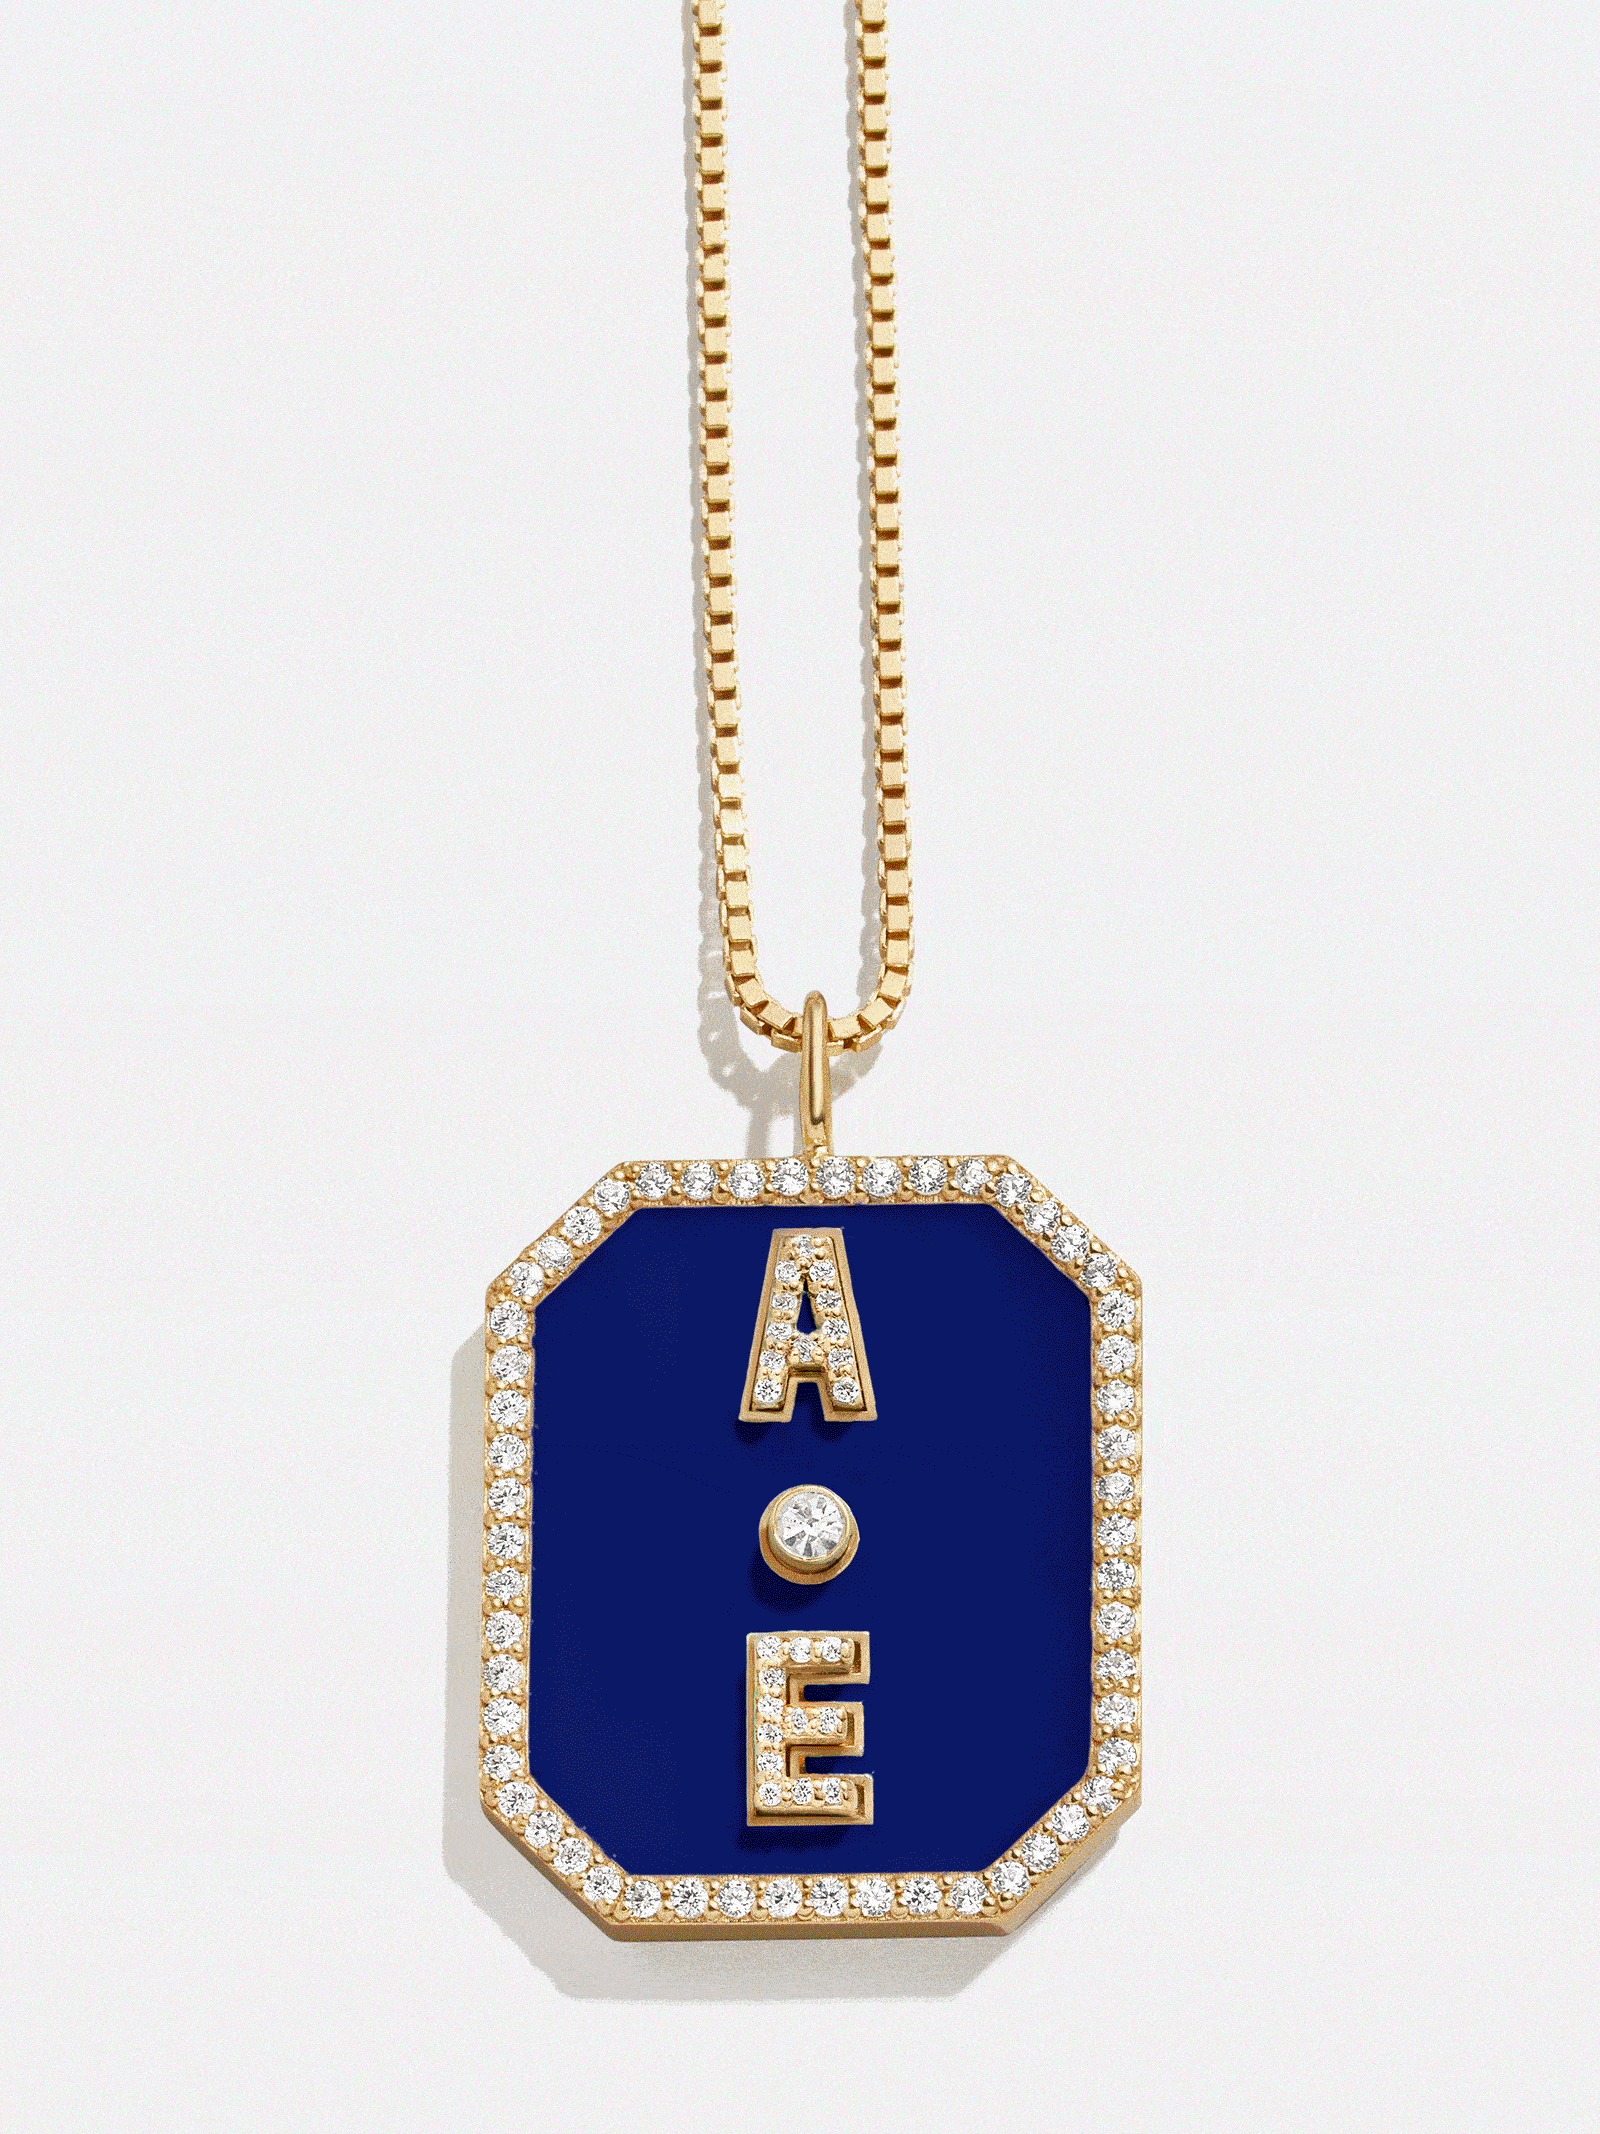  Stanley - 18k Gold Finished Luxury Dog Tag Necklace  Personalized Name Birthday Gifts Ideas Jewelry : Everything Else